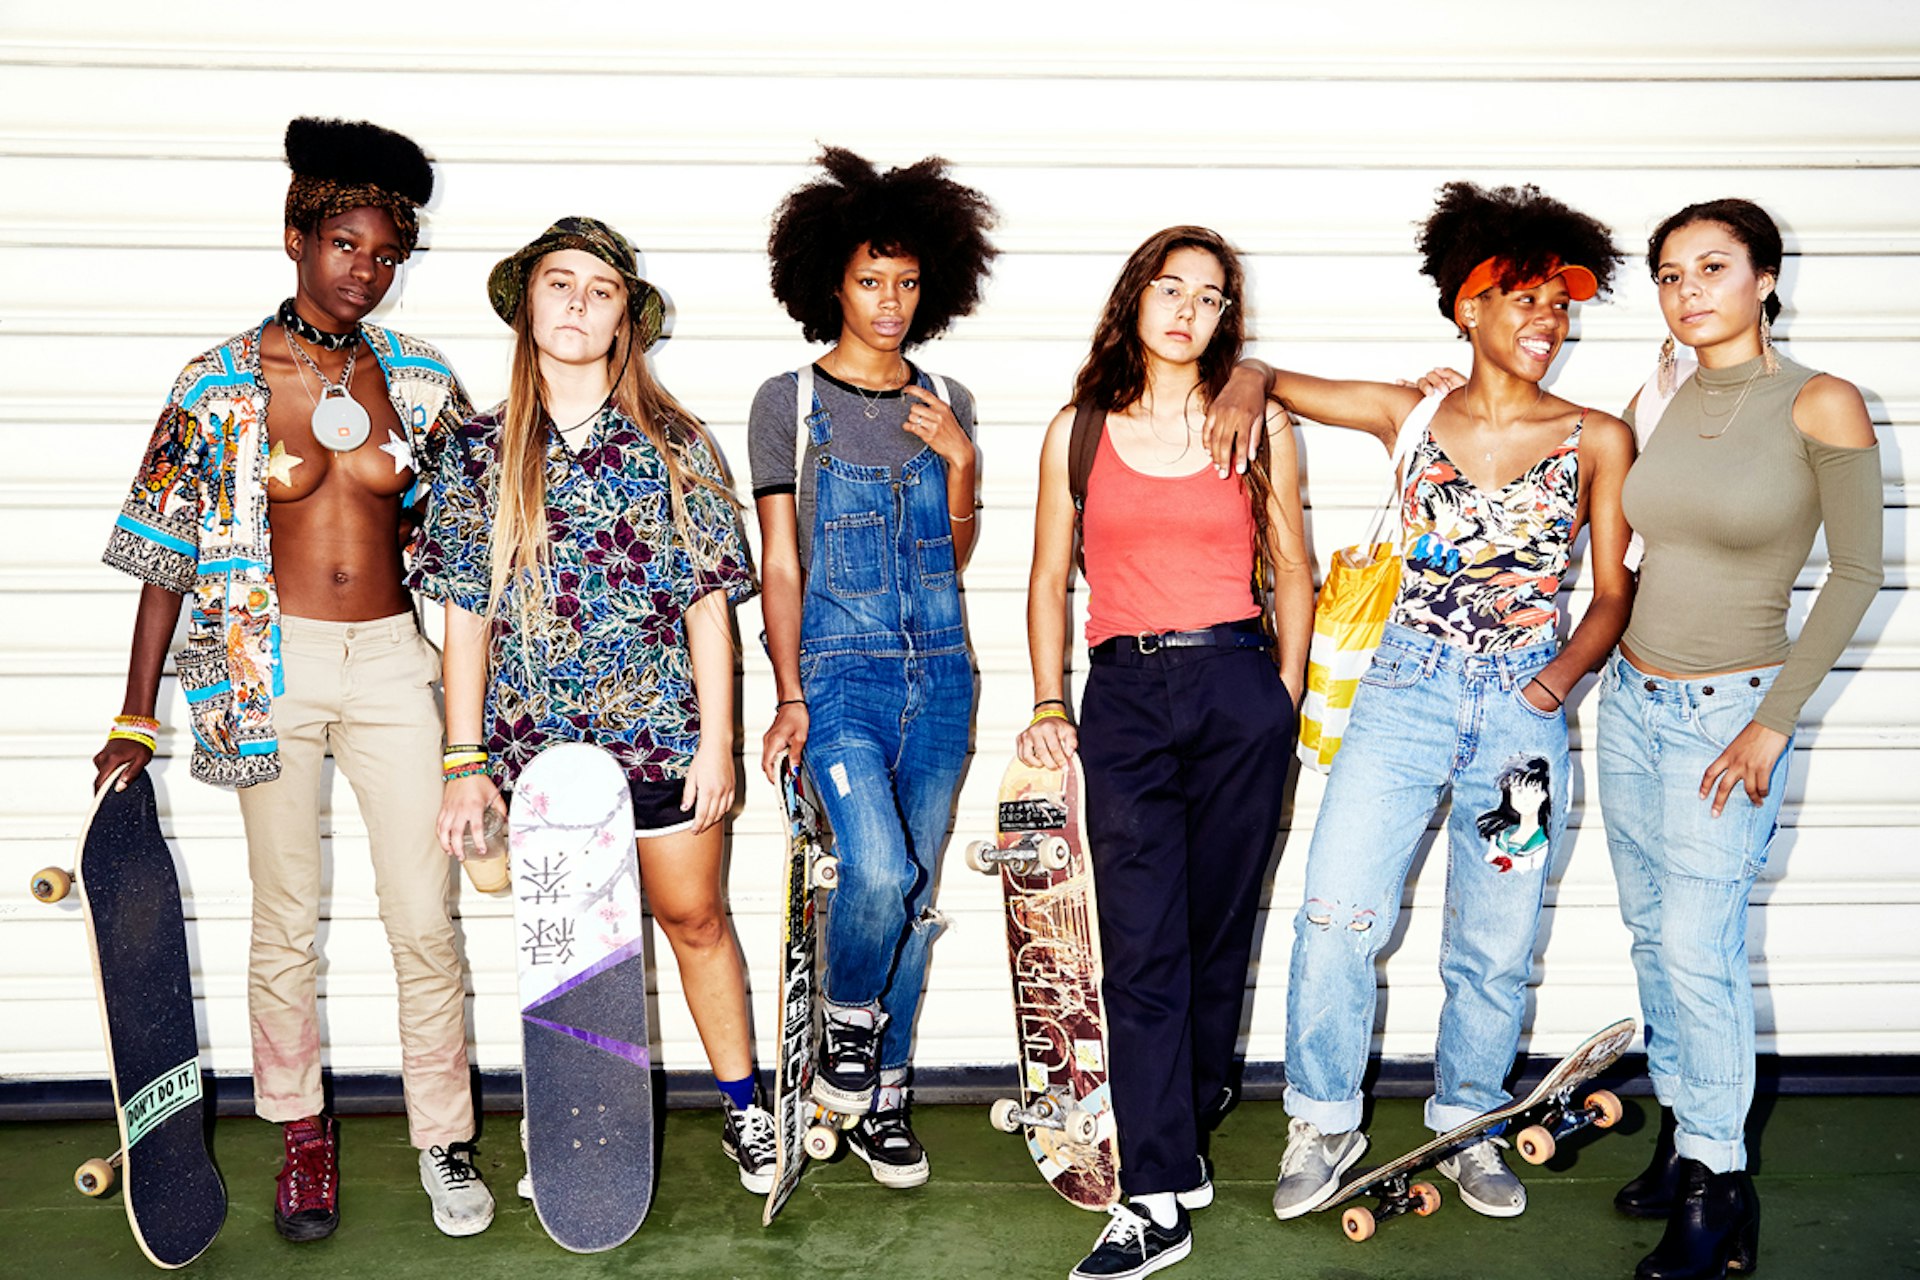 The all-woman skate crew taking over the streets of NYC